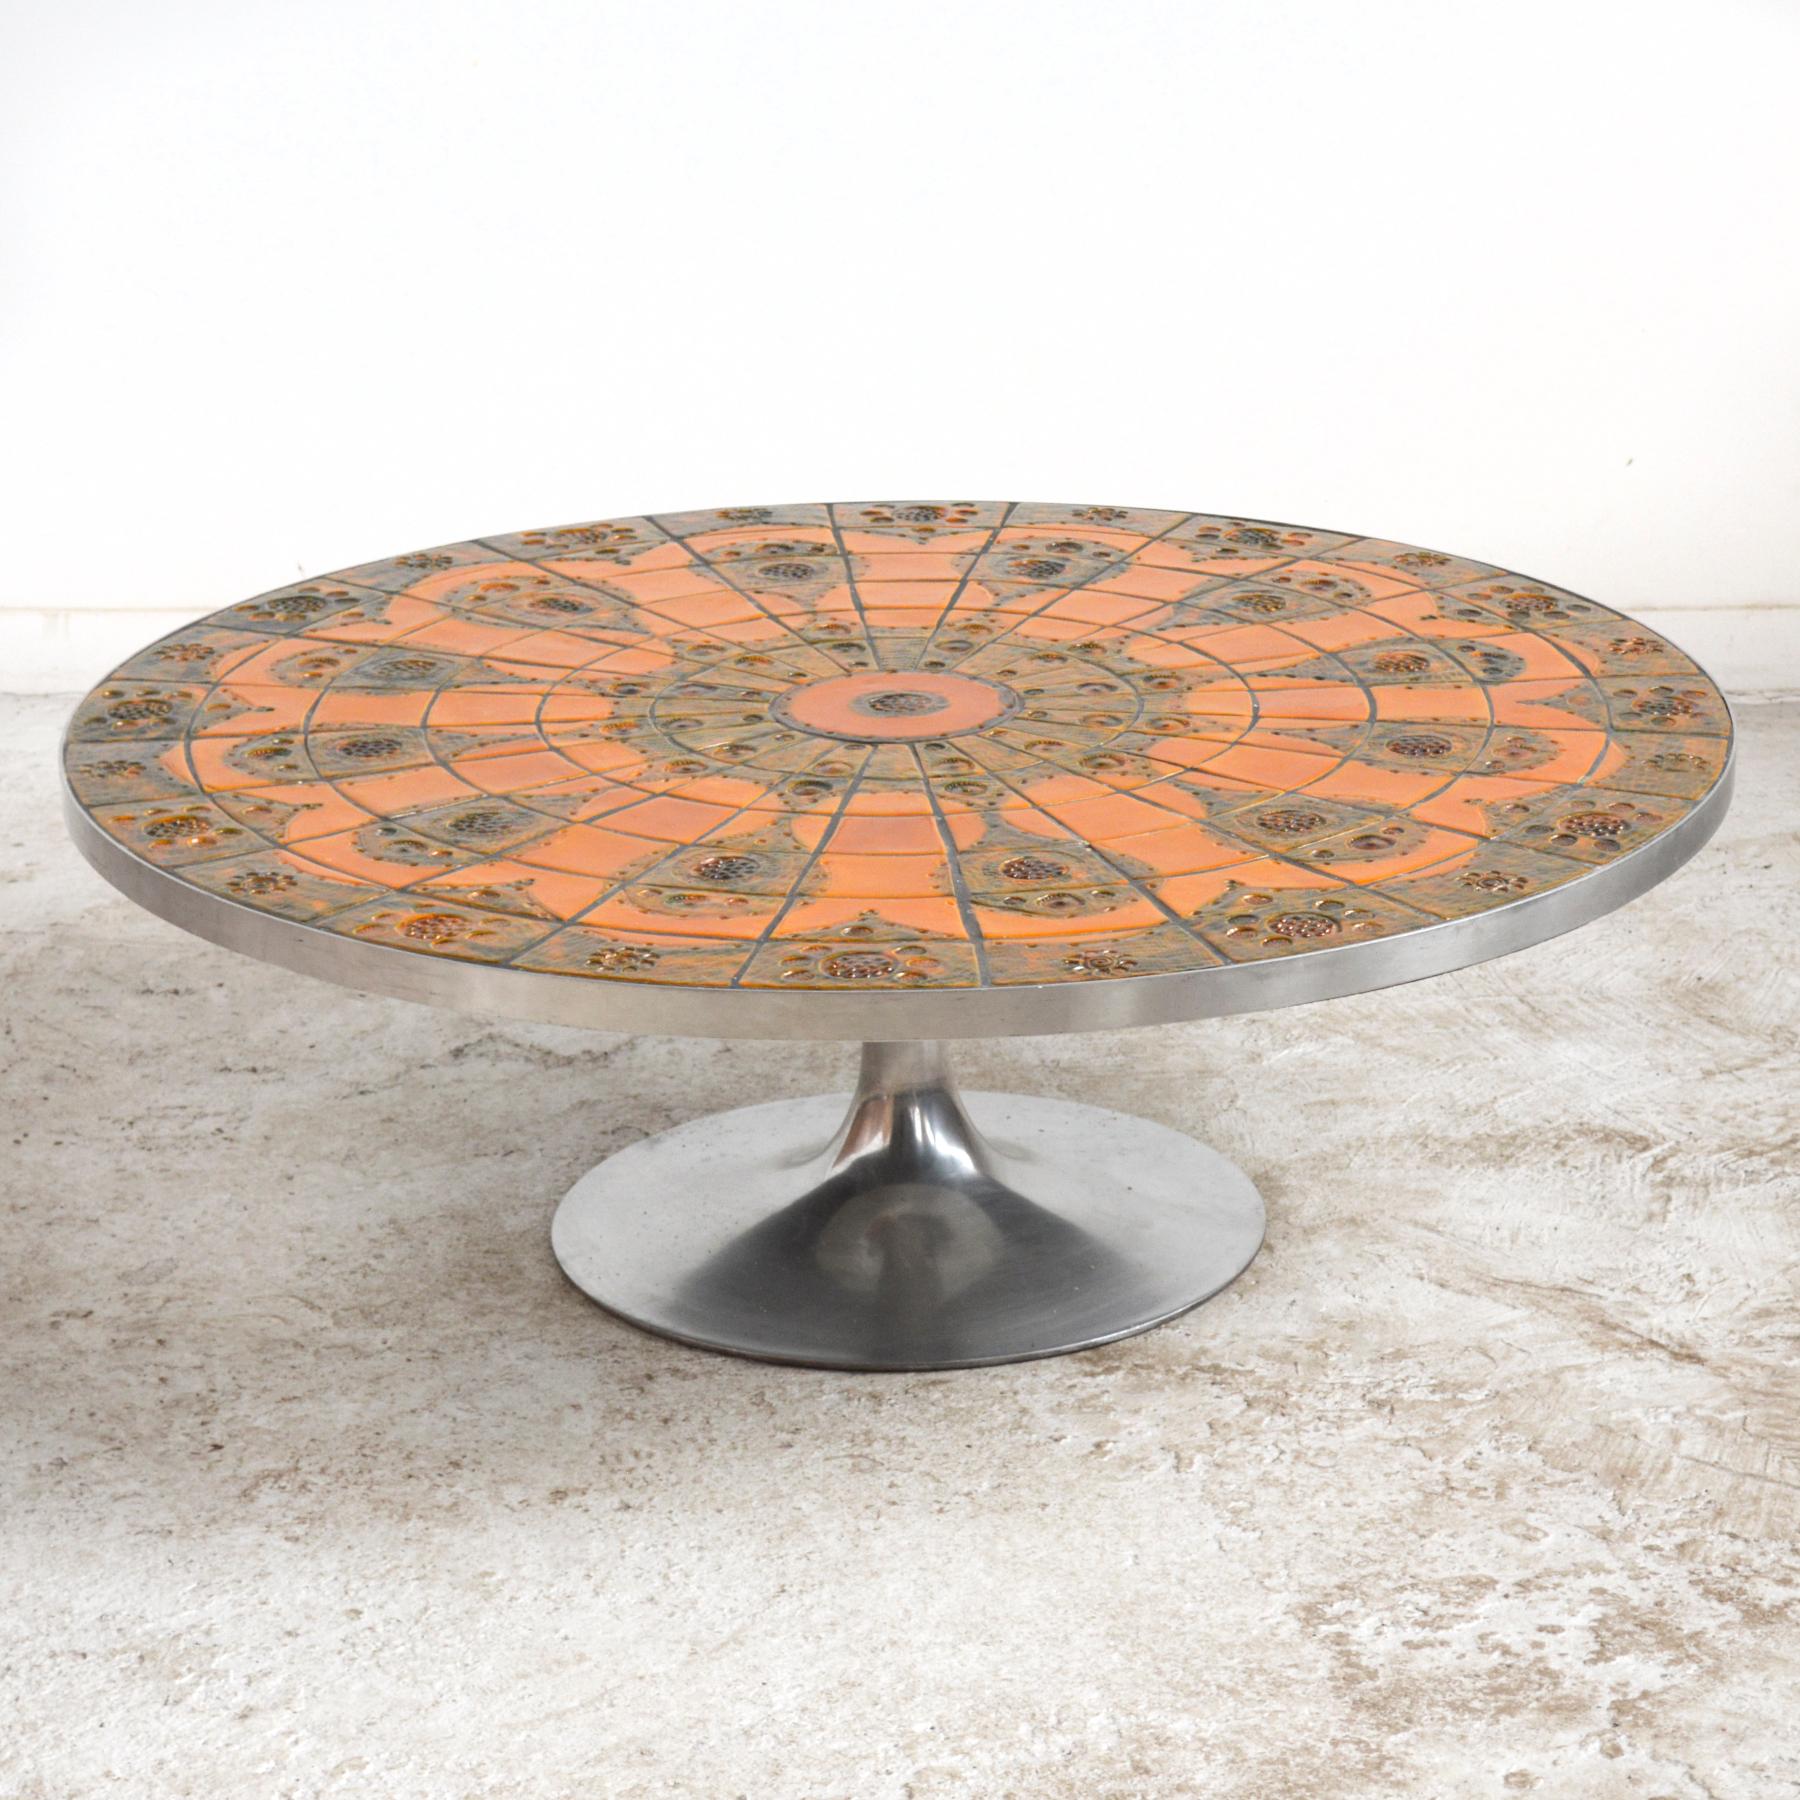 This striking Poul Cadovius coffee table has a stunning tile top by Lilly Just Lichtenberg in burnt orange and earth tones supported by an aluminum tulip style base. The wonderful abstract design will make it the centerpiece of any room.